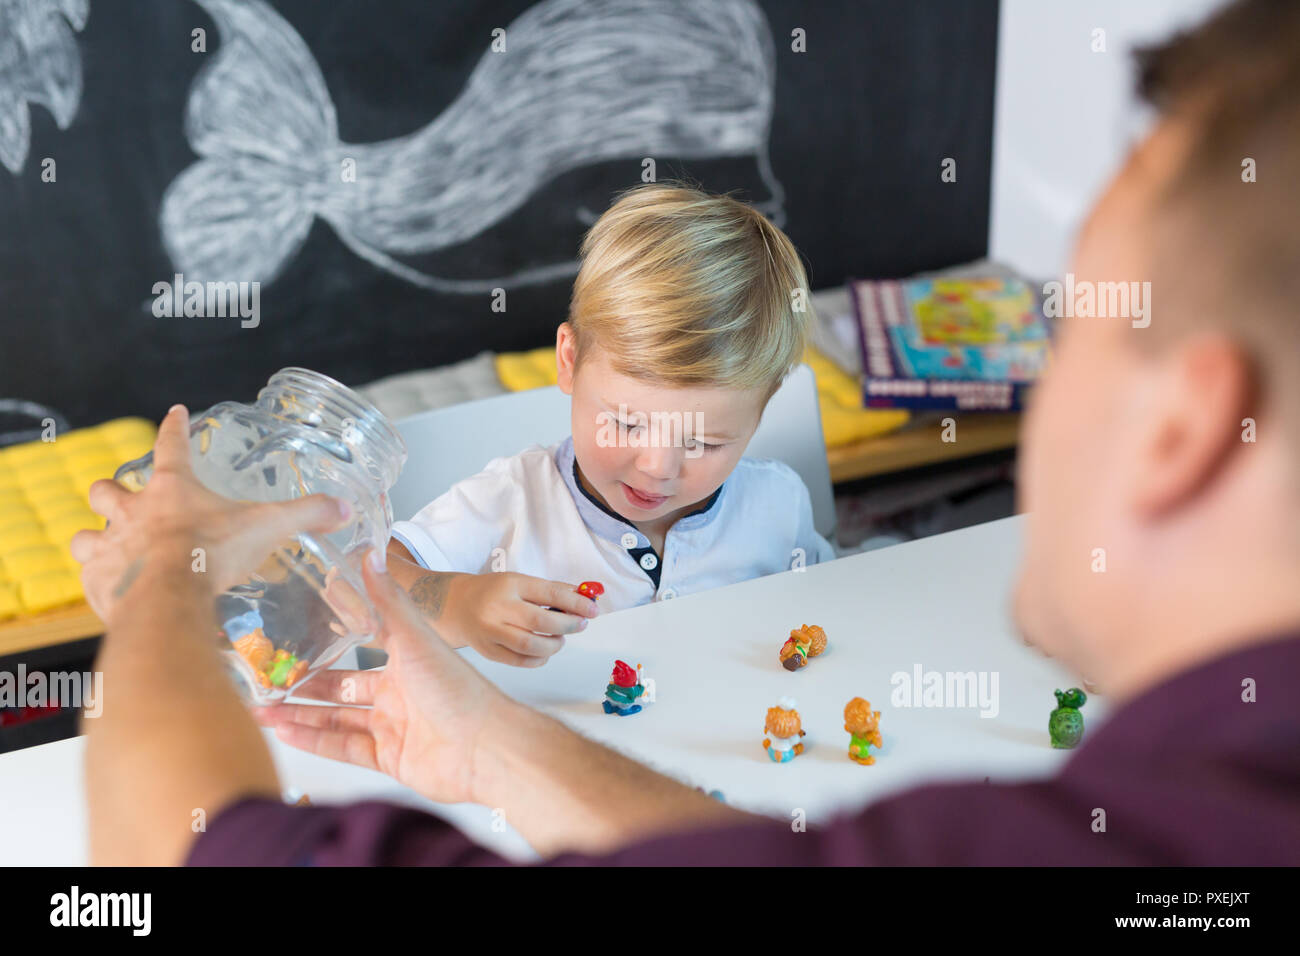 Cute little toddler boy at child therapy session. Stock Photo